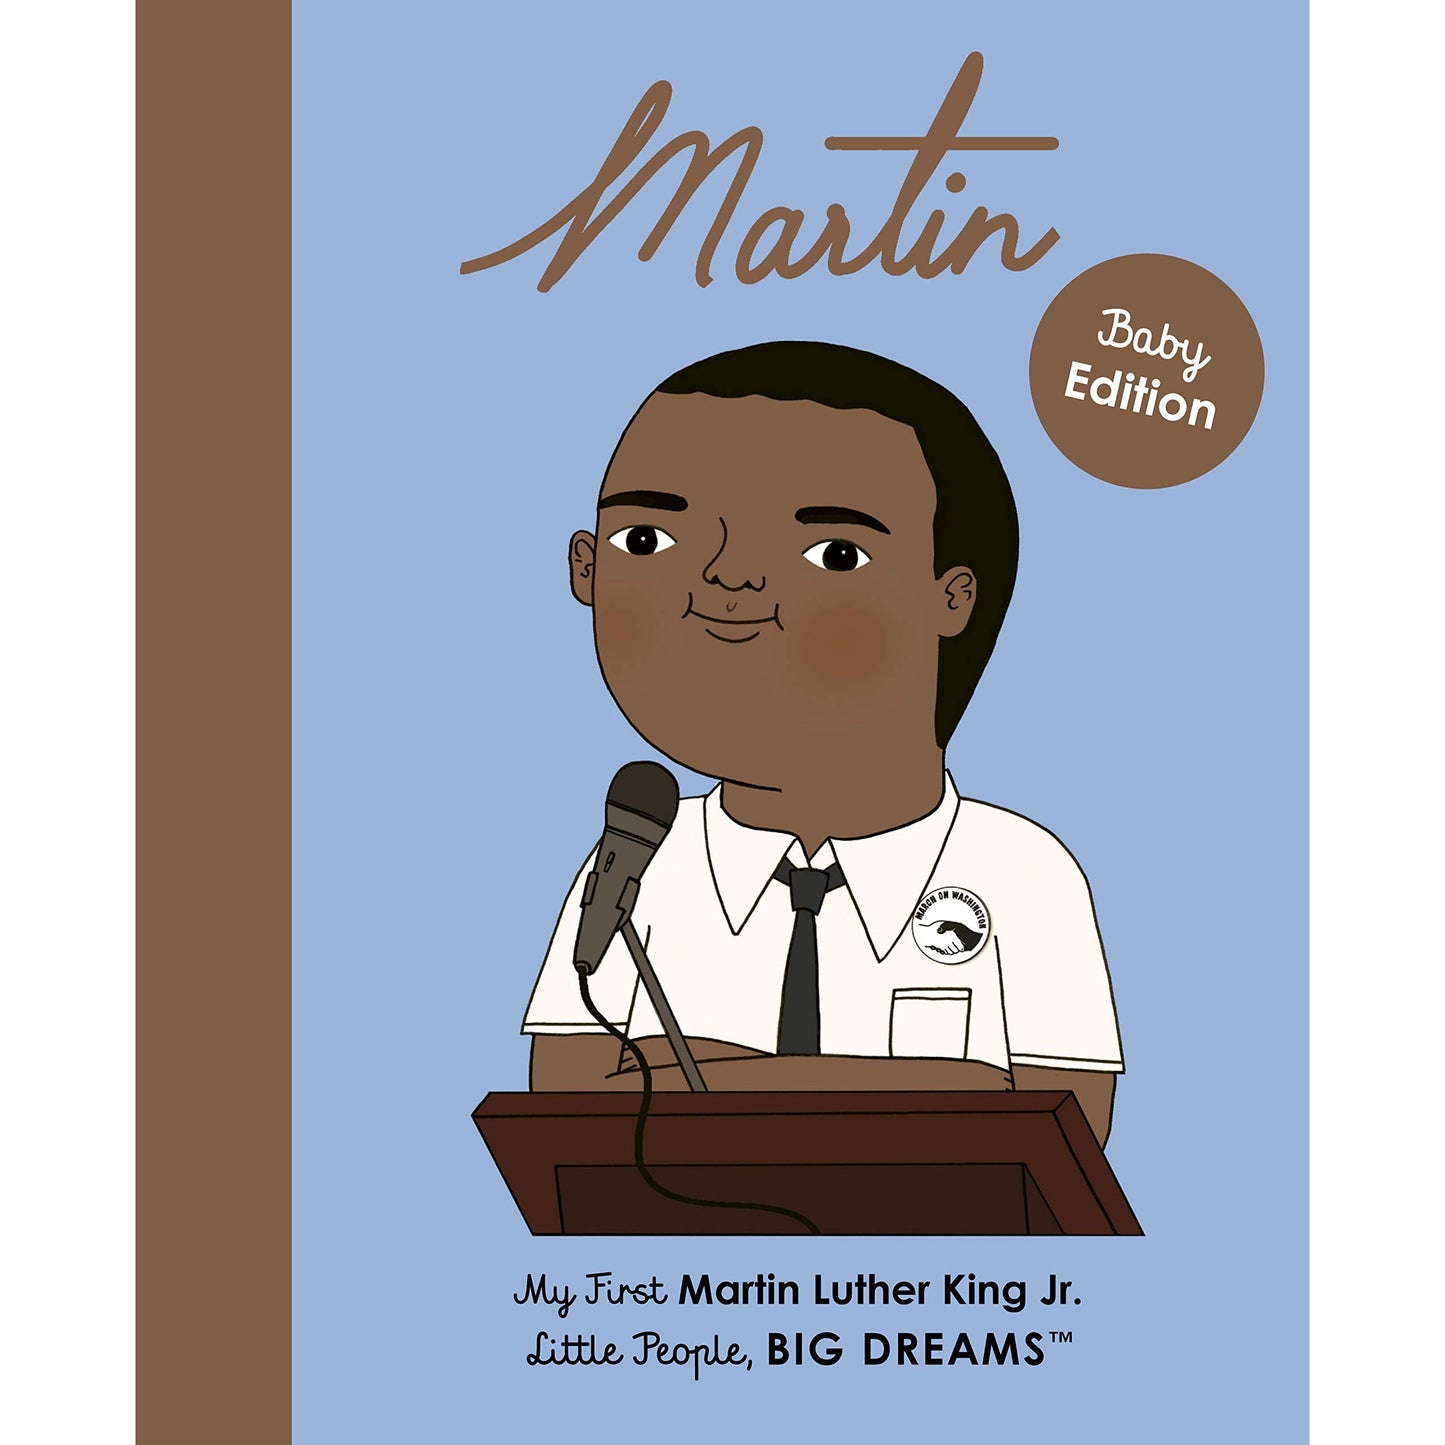 Martin Luther King Jr. - My First Little People BIG DREAMS - Muddy Boots Home UK